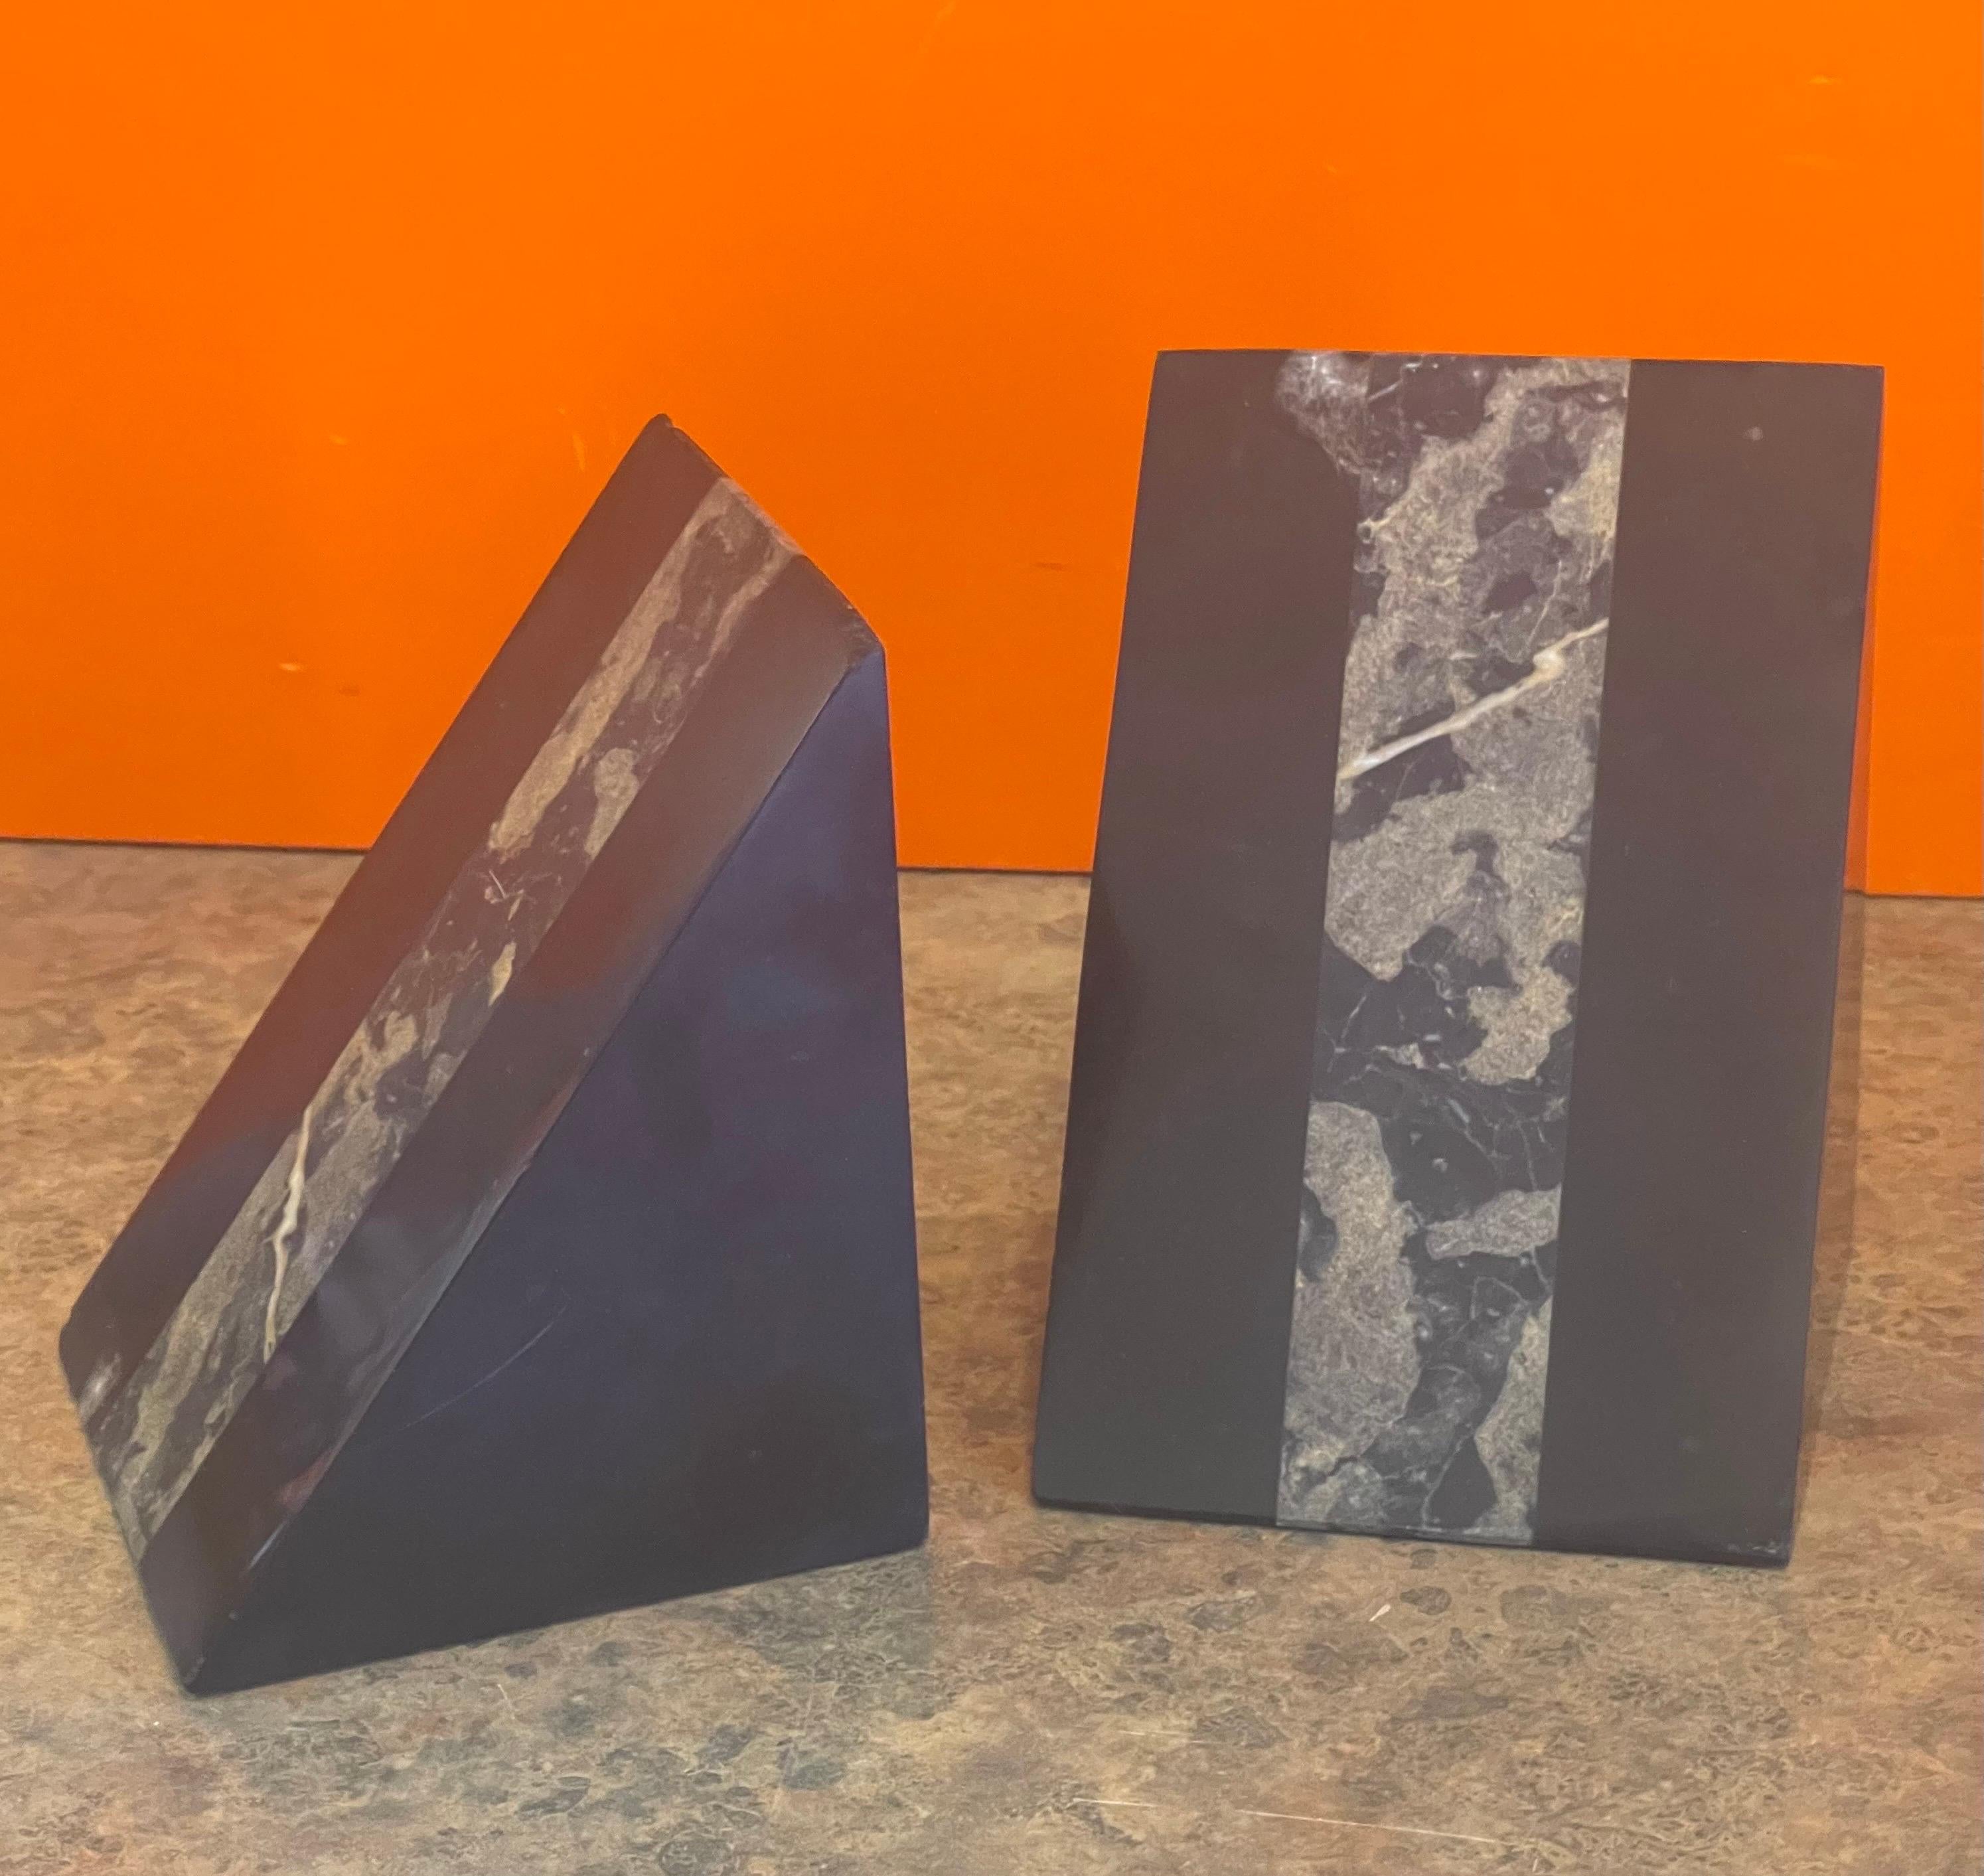 Attractive pair of cut marble Art Deco triangle bookends, circa 1940s. They are in original condition with a nice patina and some small chips around the corners (please see pictures); the pair measures 7.75